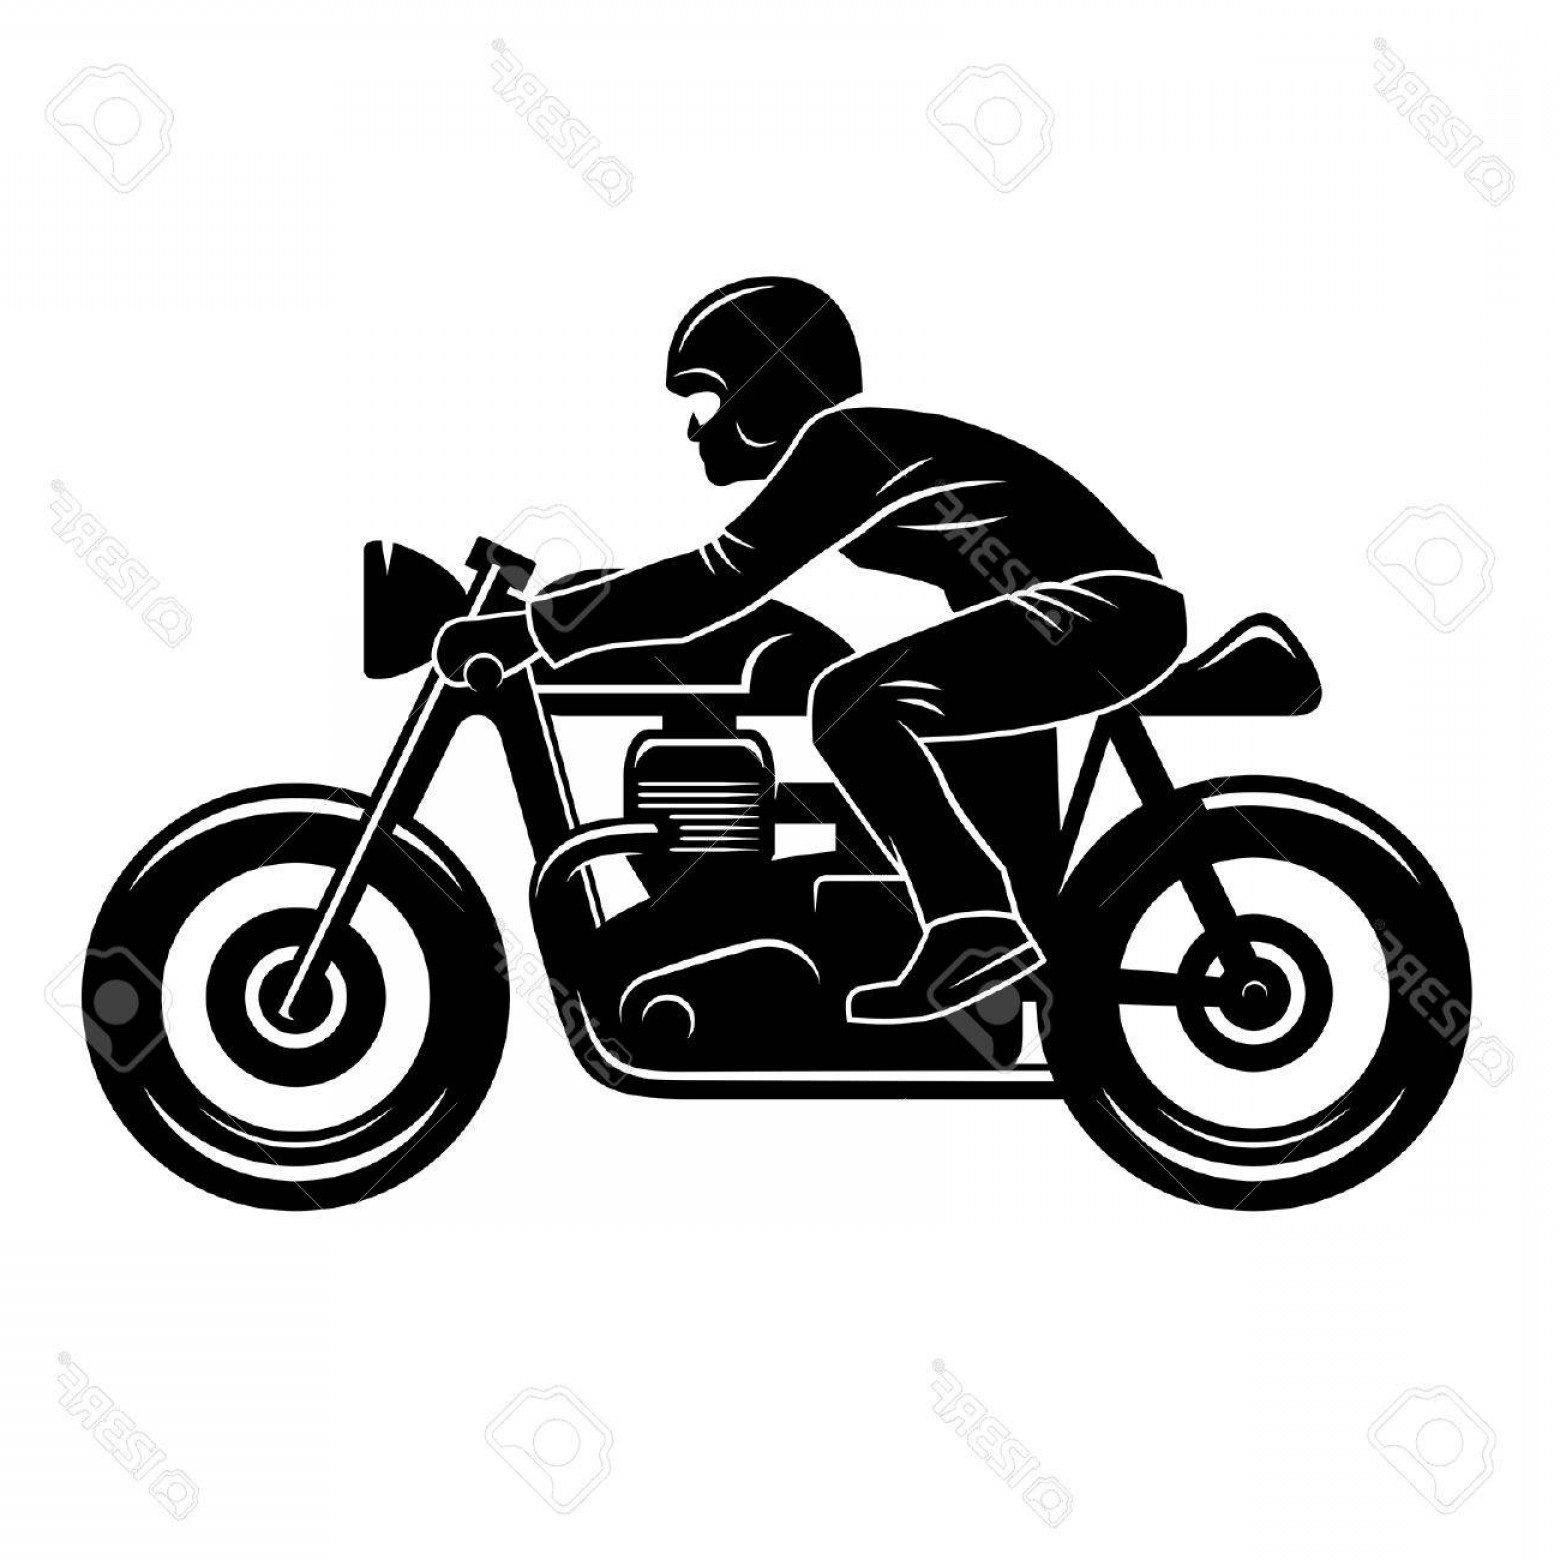 Cafe Racer Vector at GetDrawings | Free download